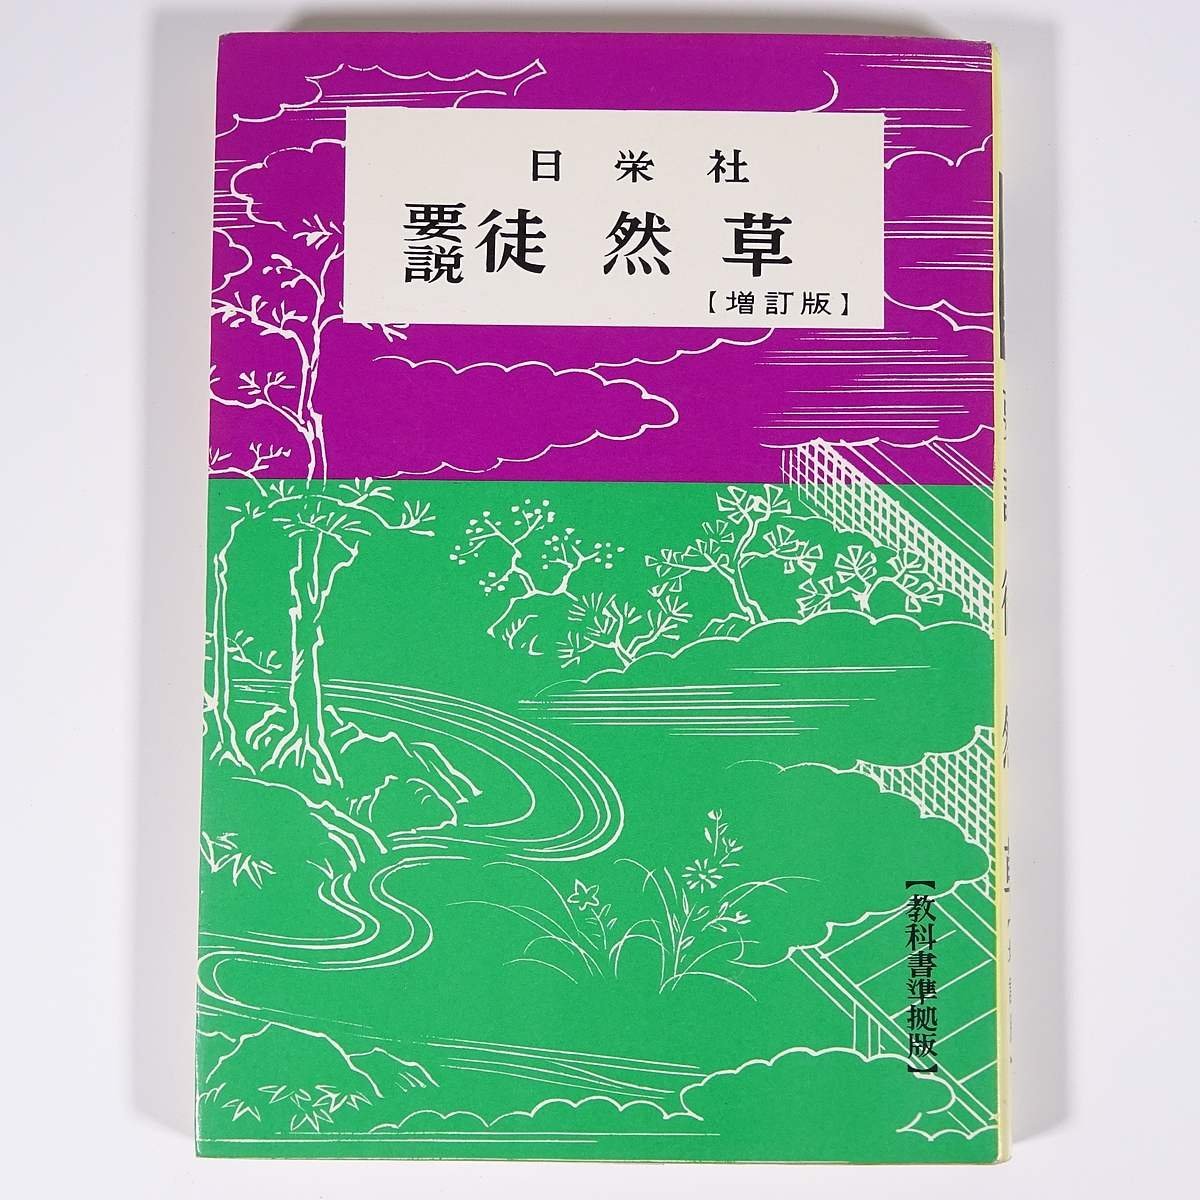  necessary opinion ... increase . version day britain company 1985 separate volume study examination . a little over national language Japanese literature classical literature old writing 